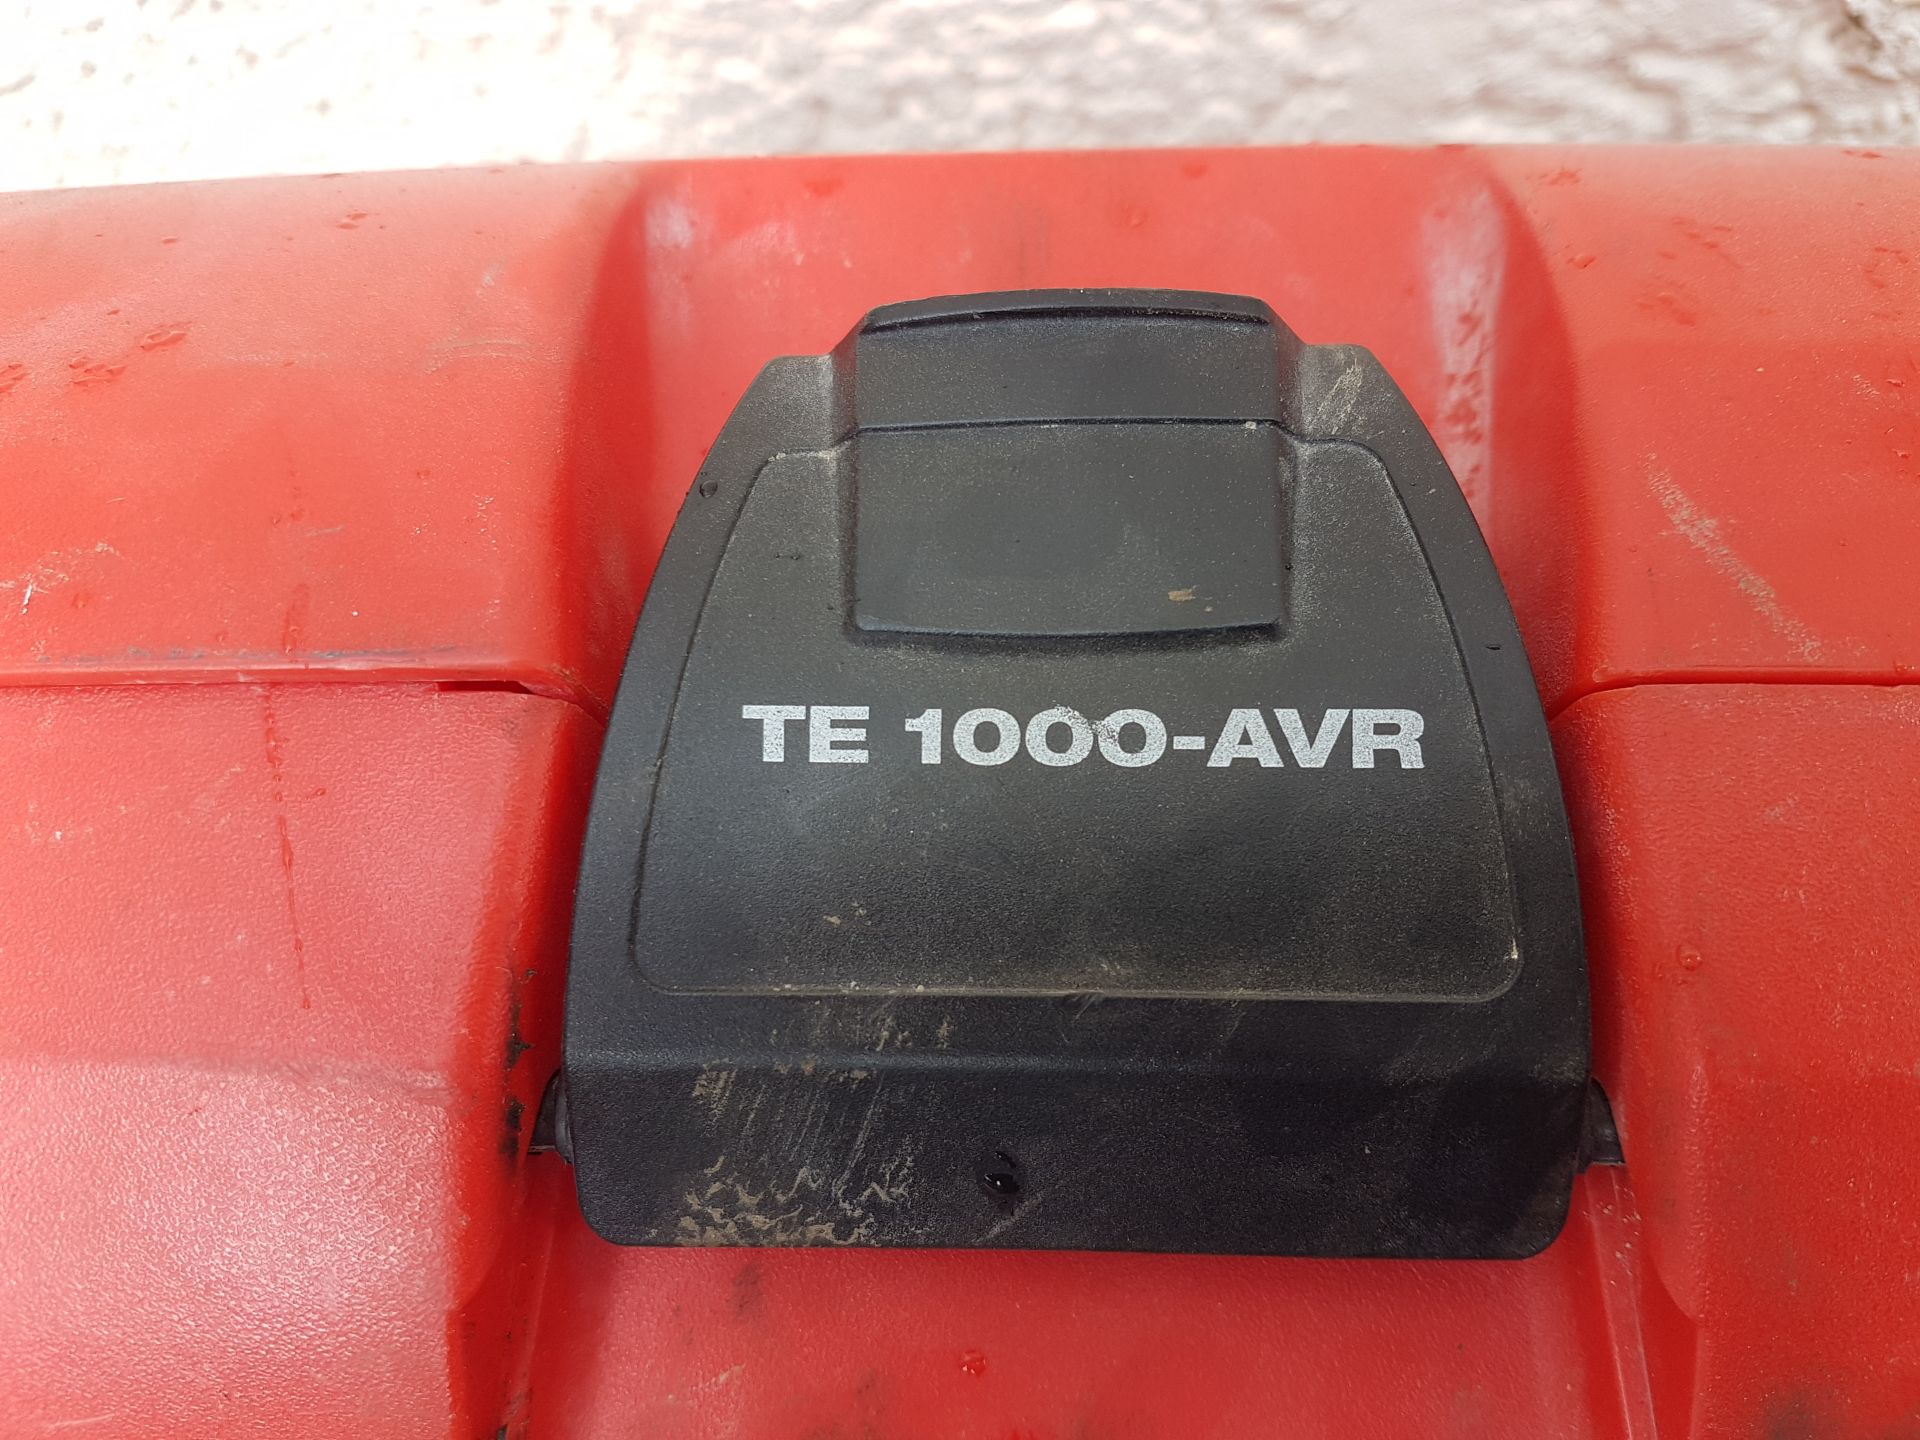 Hilti TE 1000 AVR Concrete Breaker with Chisel 110v in Box - Tested / In Working Order - Image 2 of 2